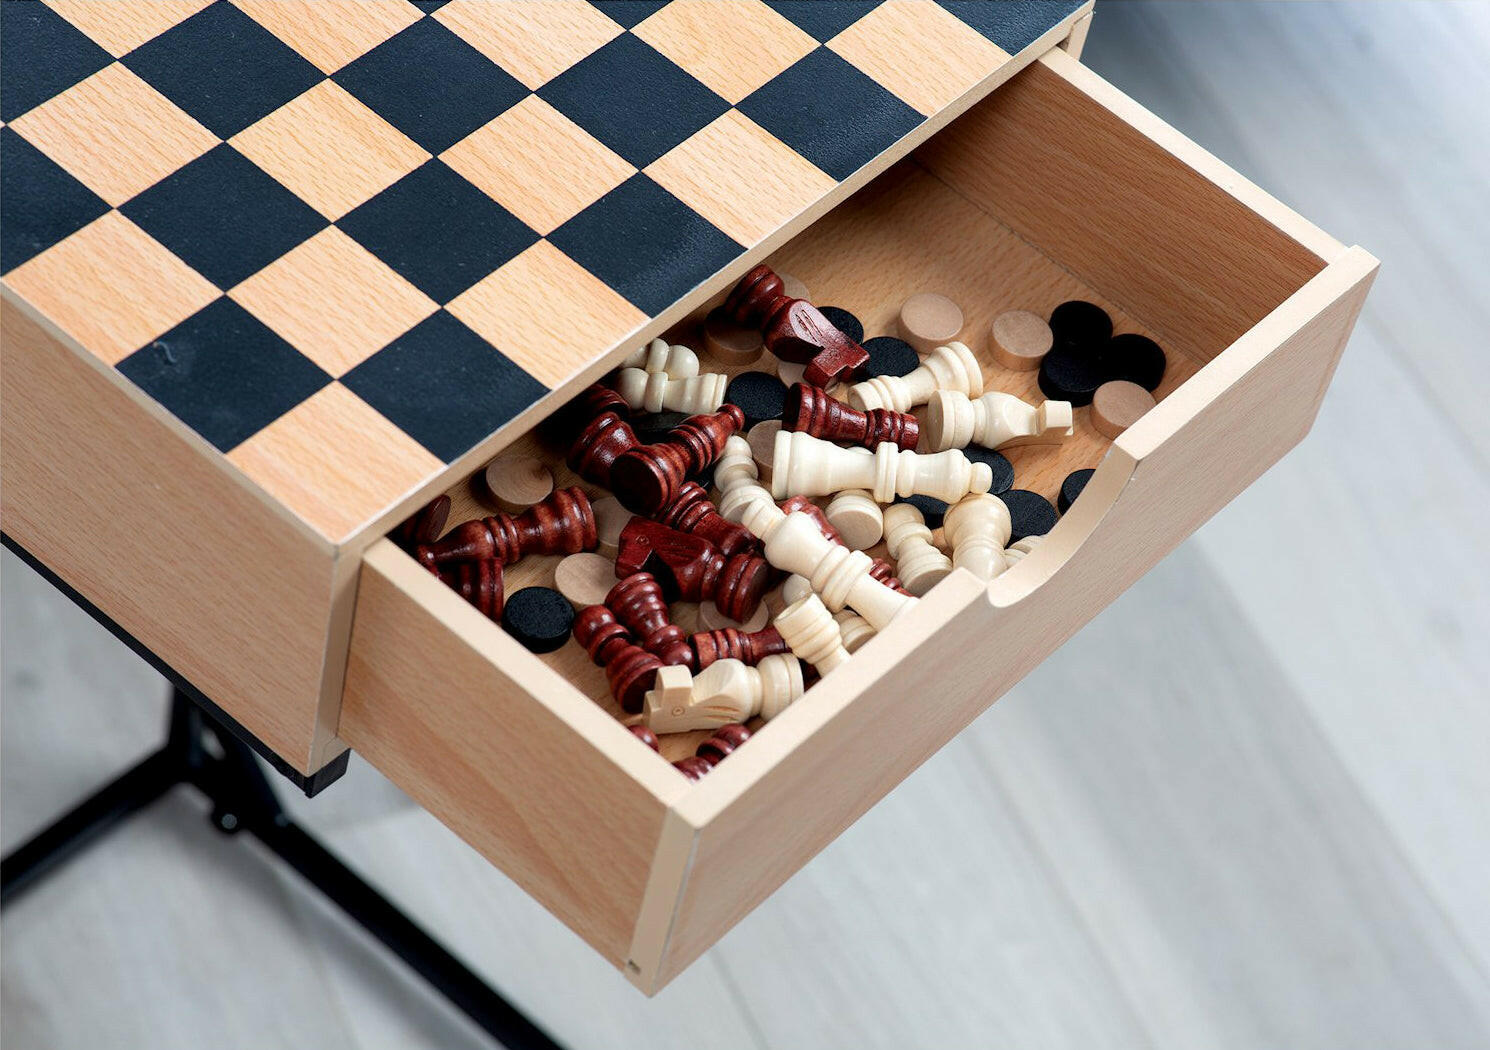 Wooden Chess & Checkers Game Set with Metal Stand.